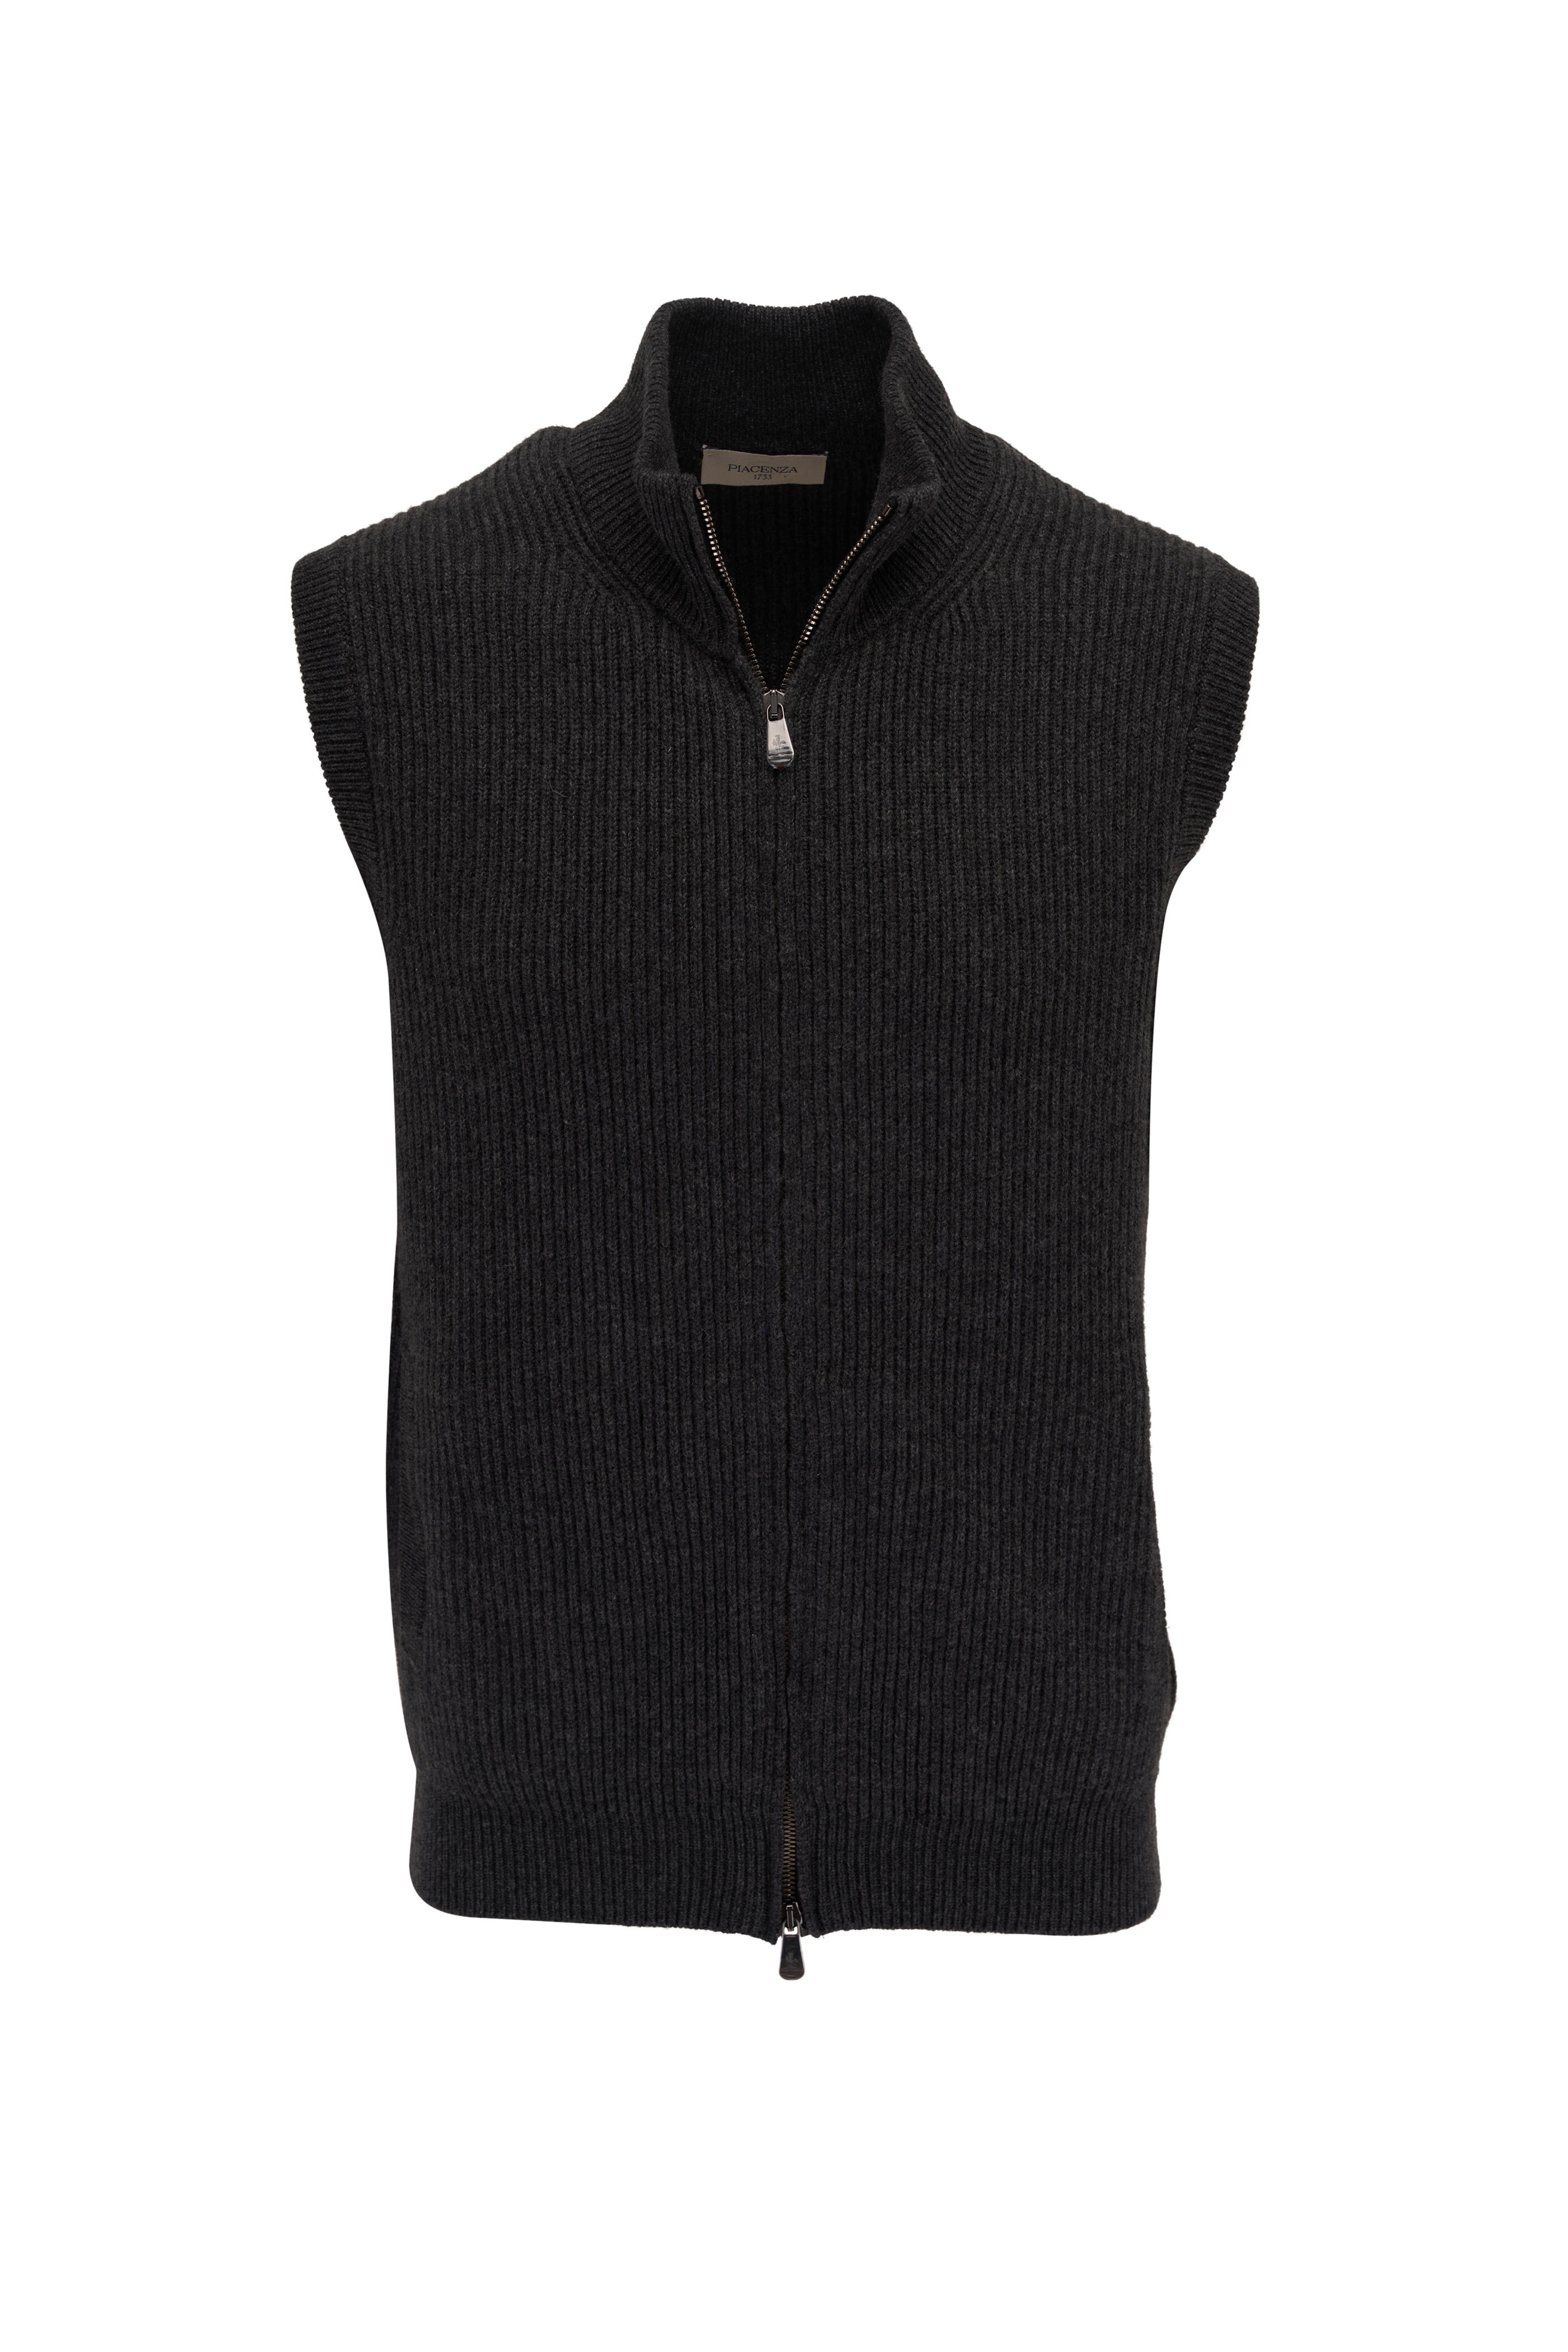 Fratelli Piacenza - Charcoal Gray Ribbed Cashmere Sweater Vest